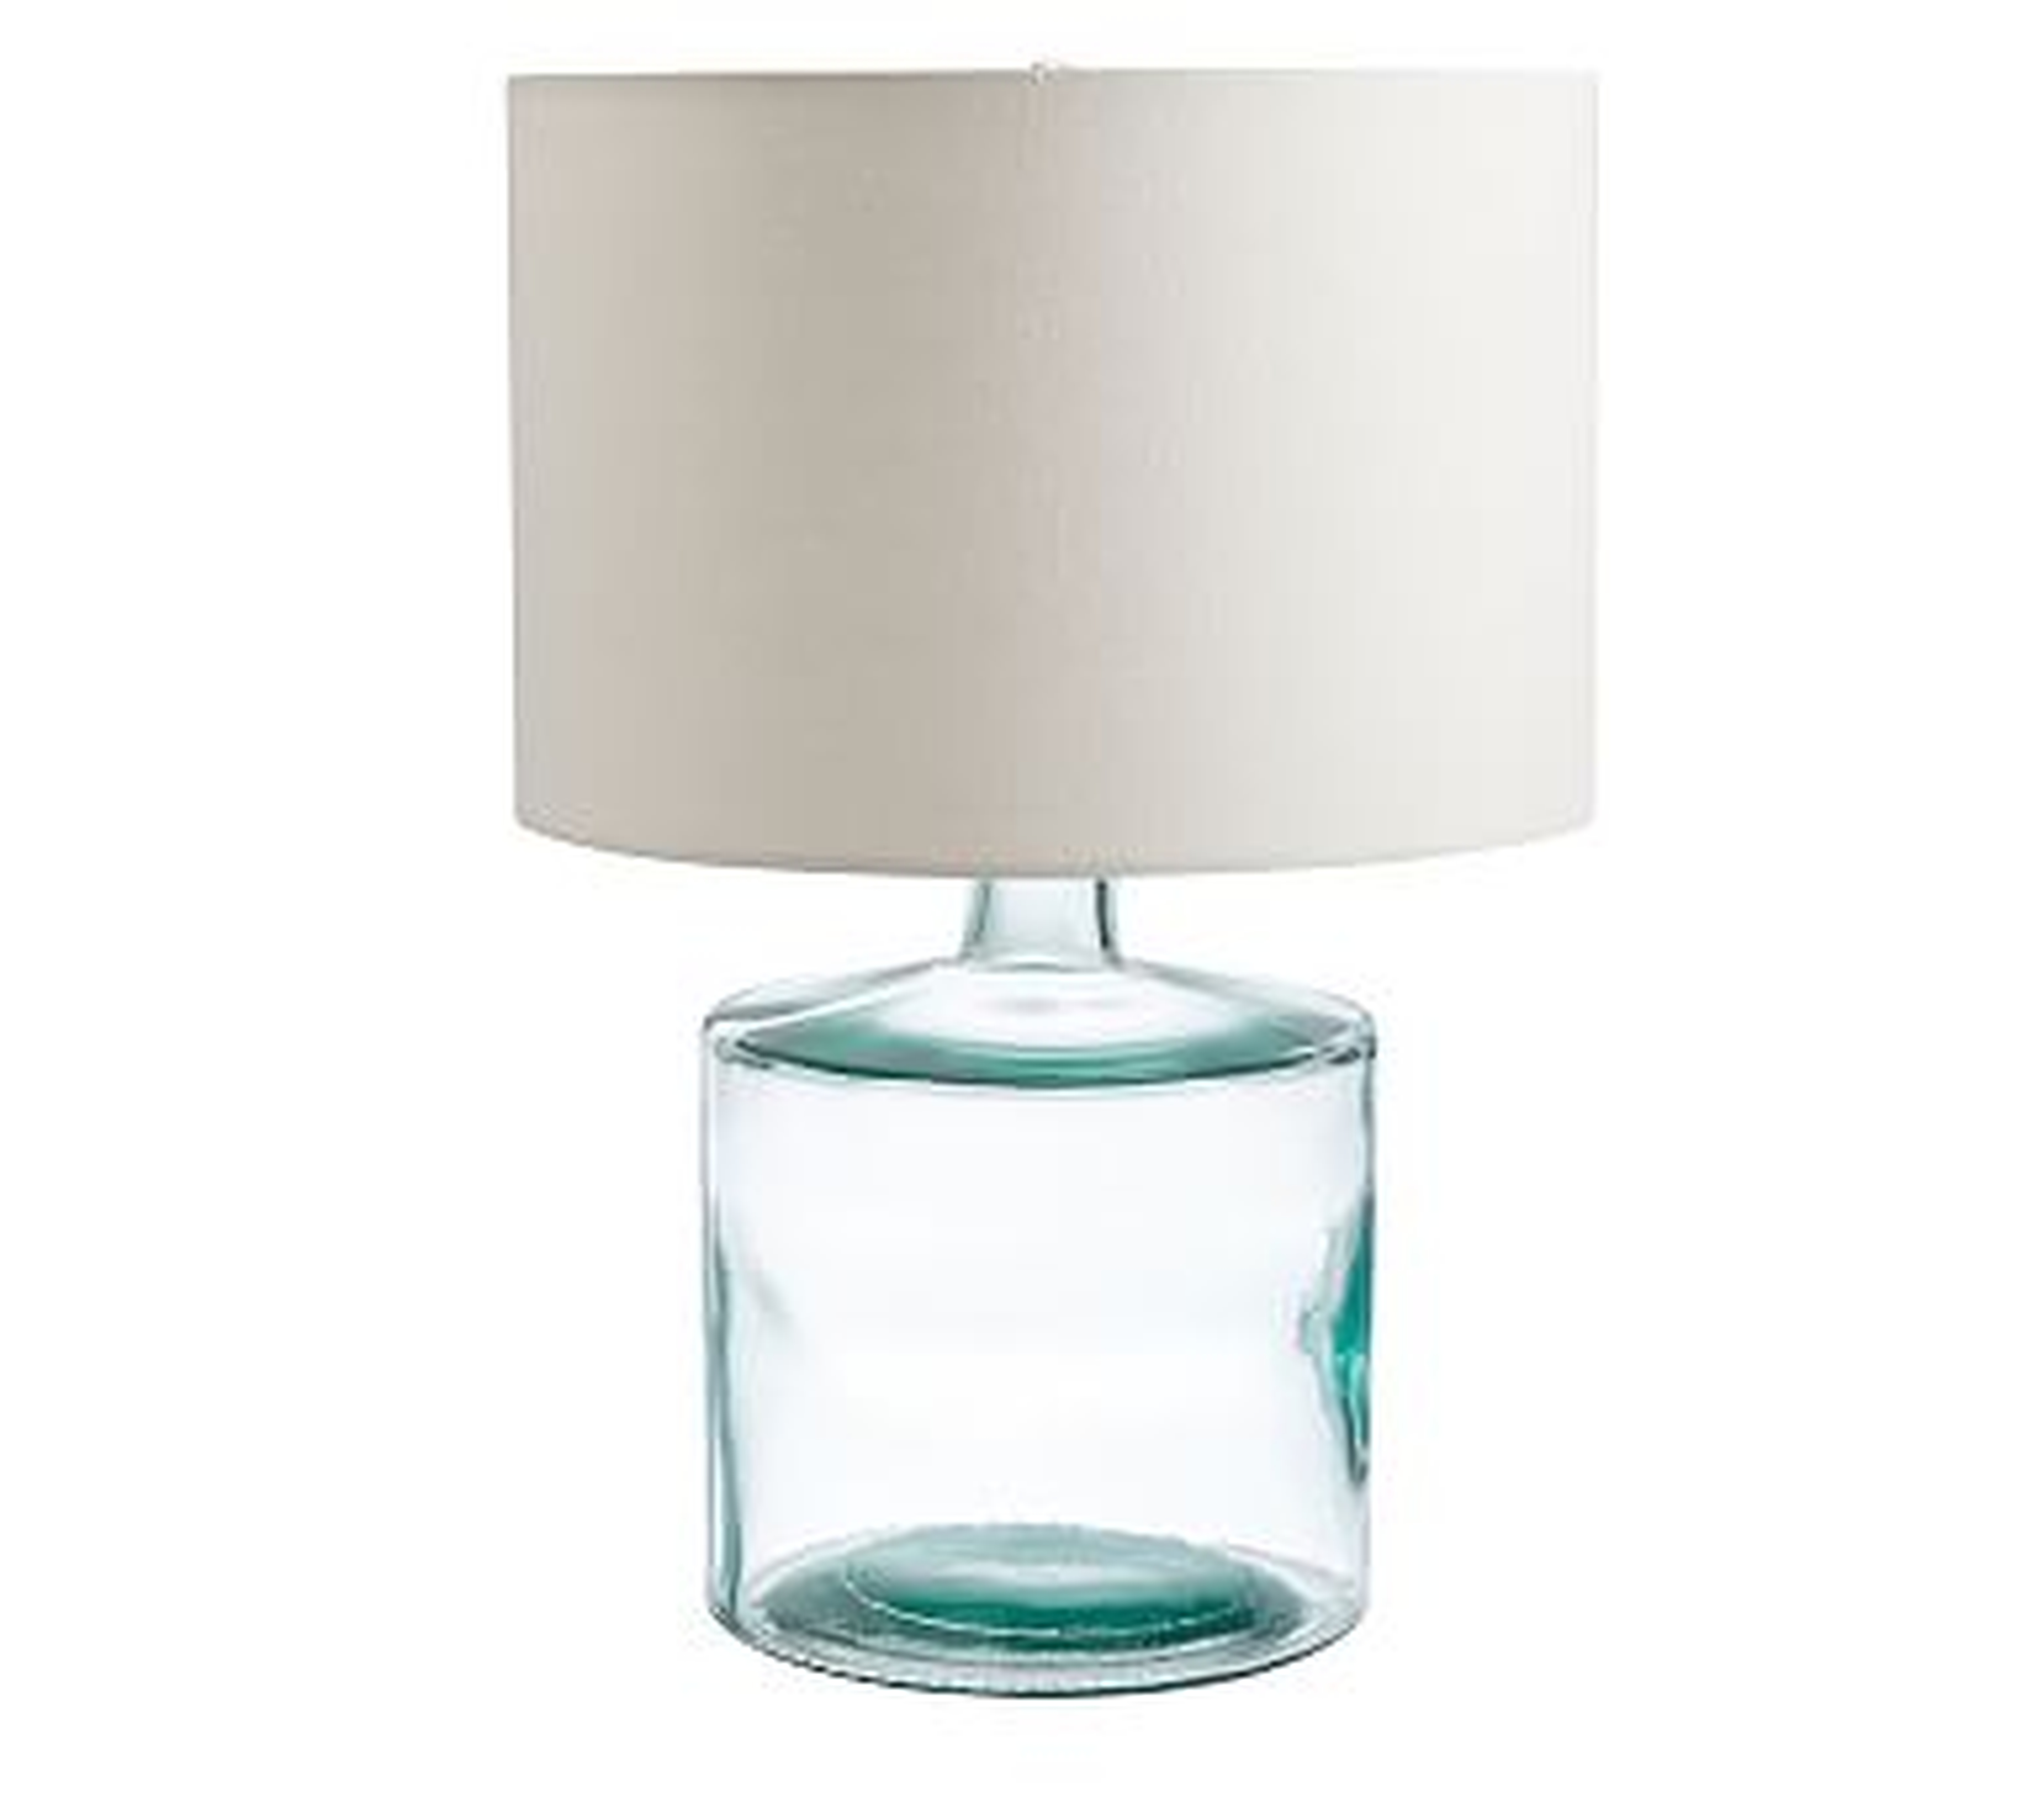 Mallorca Table Lamp, Small Base with Small Gallery Straight Sided Cotton Linen Drum Shade, White - Pottery Barn